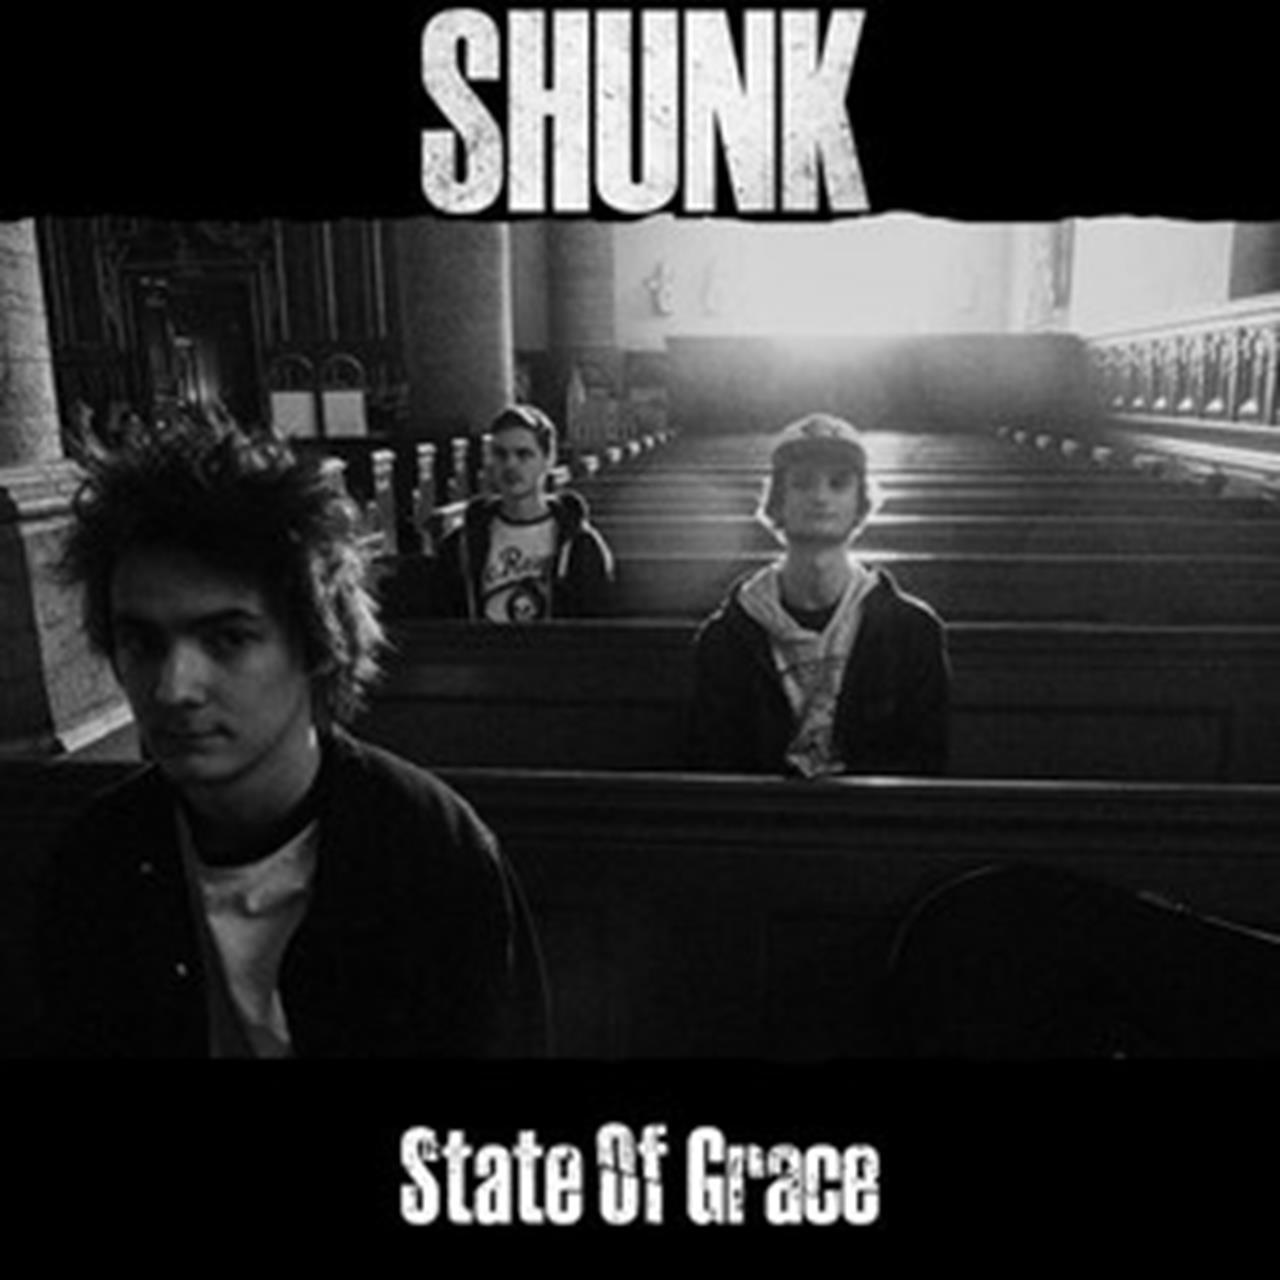 State of Grace - cover art